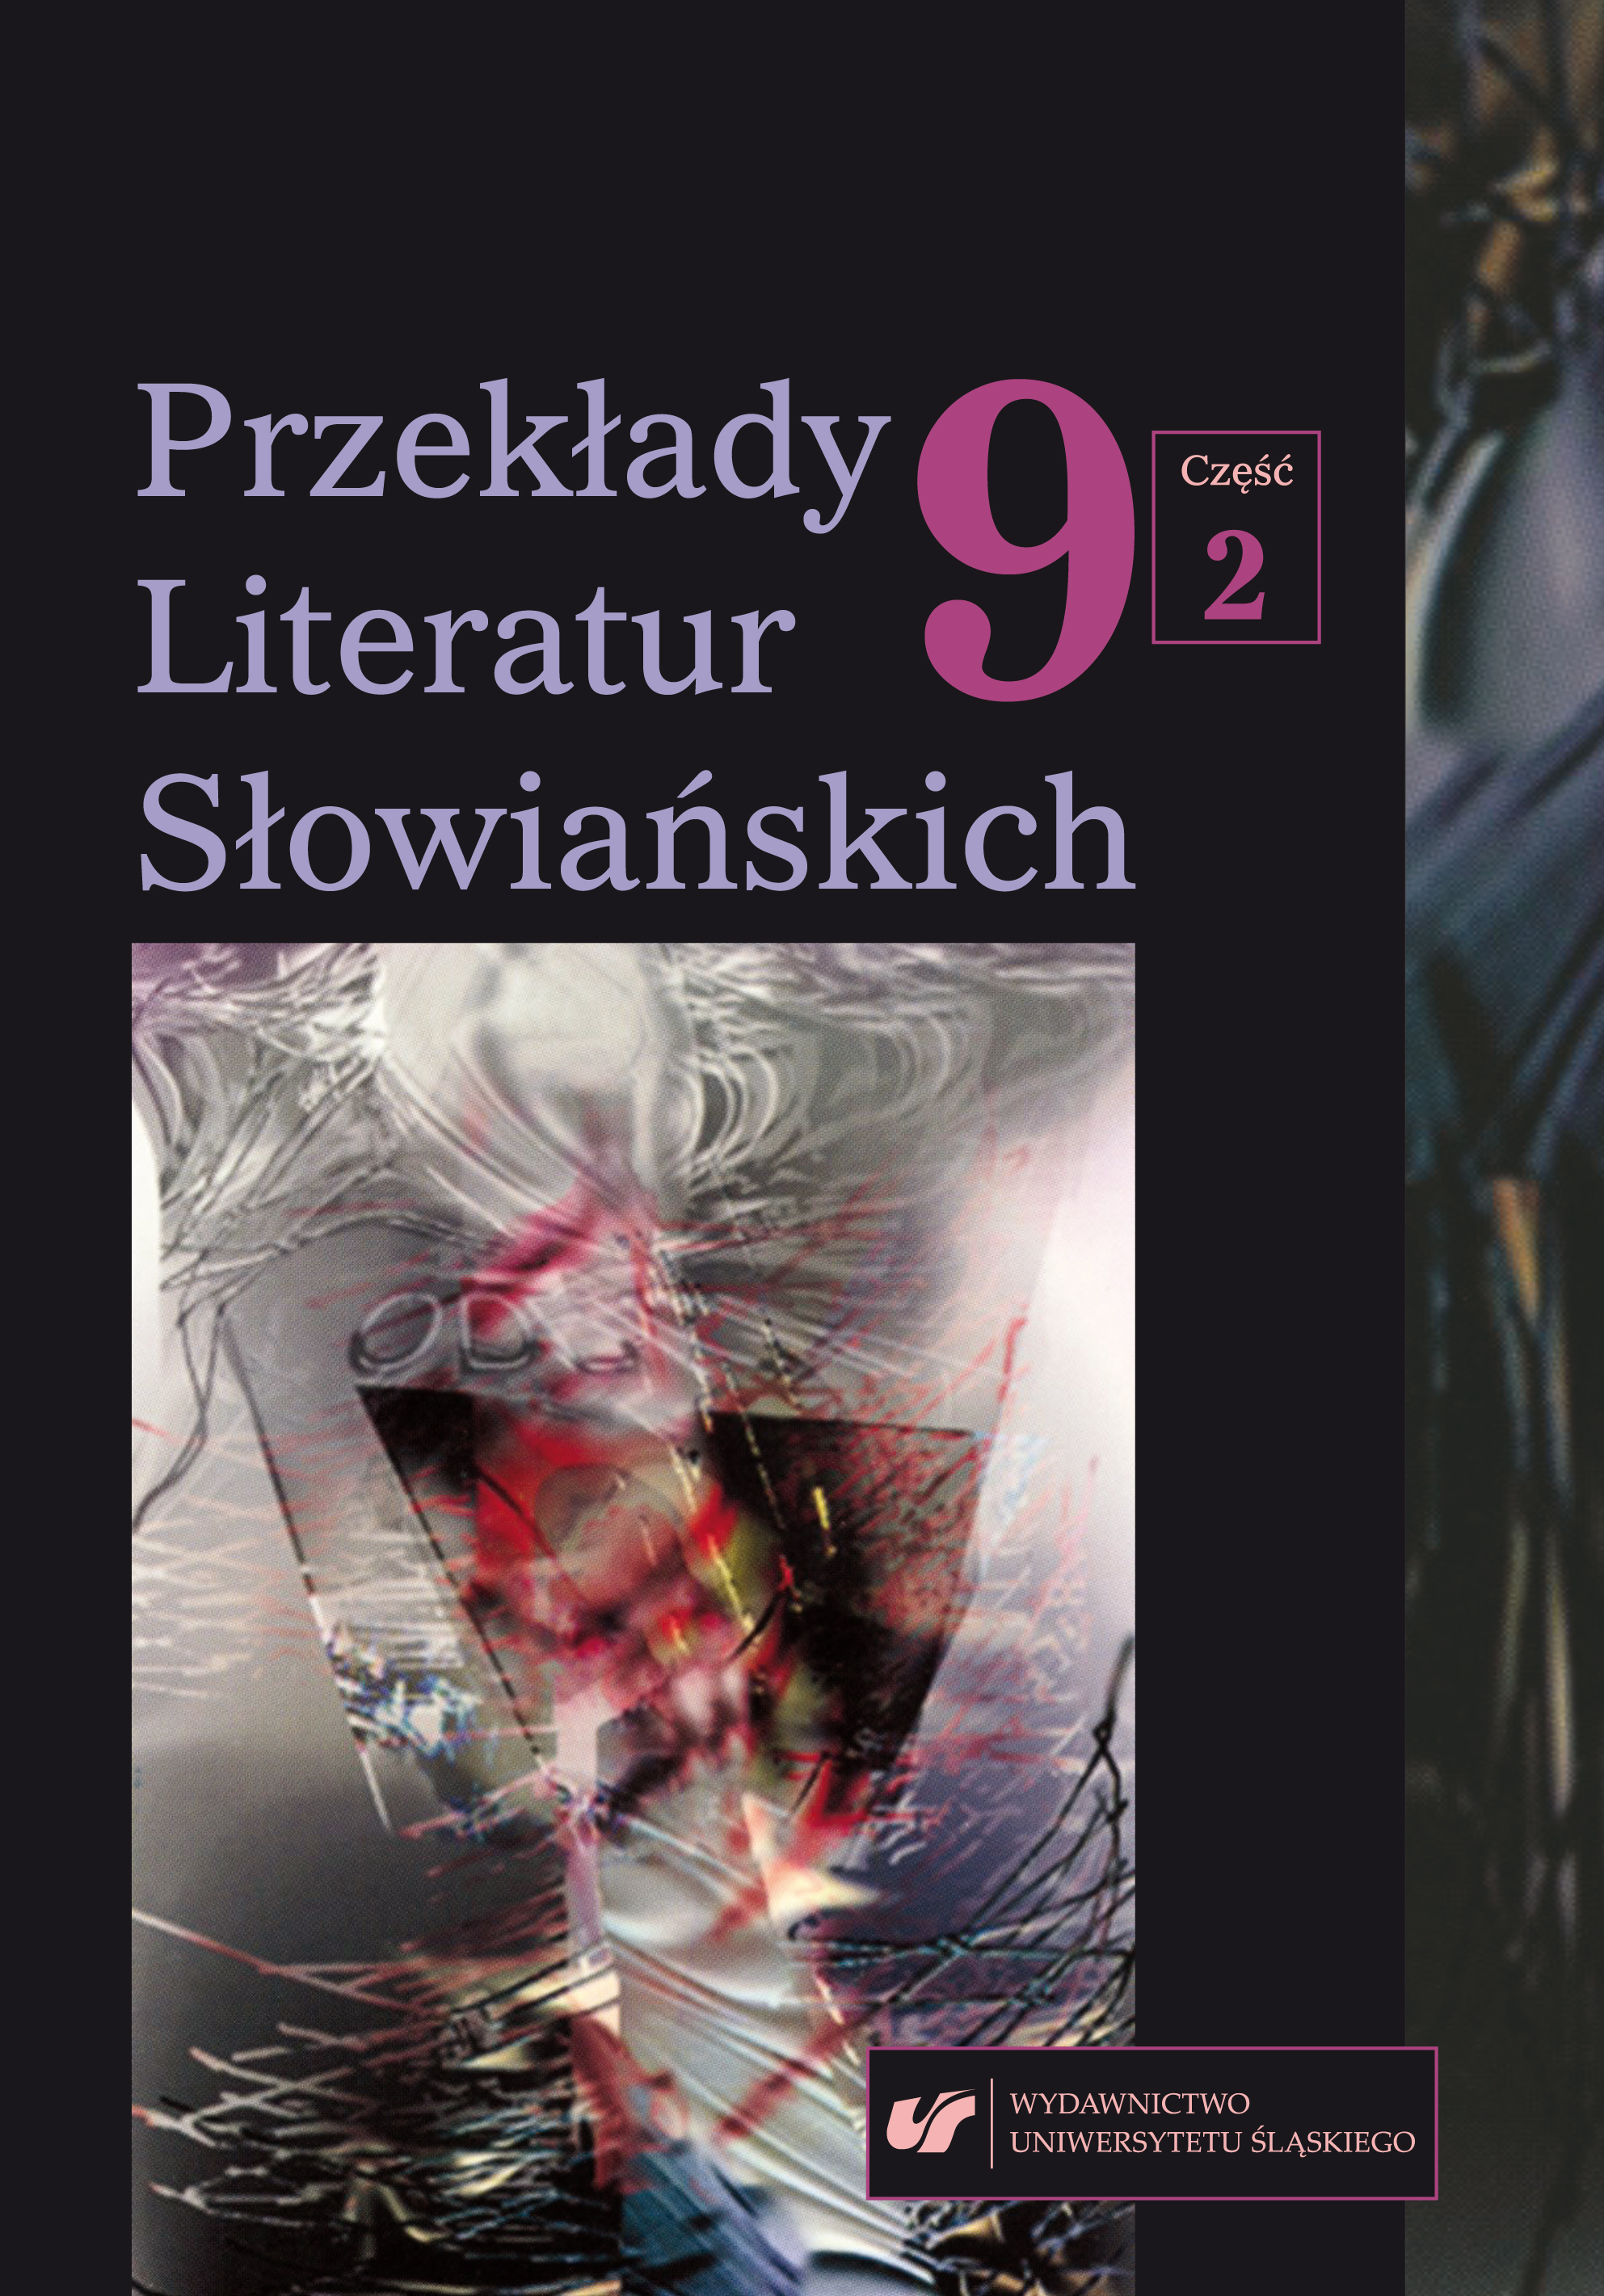 About the place and role of Slovenian literature in the German-speaking area Cover Image